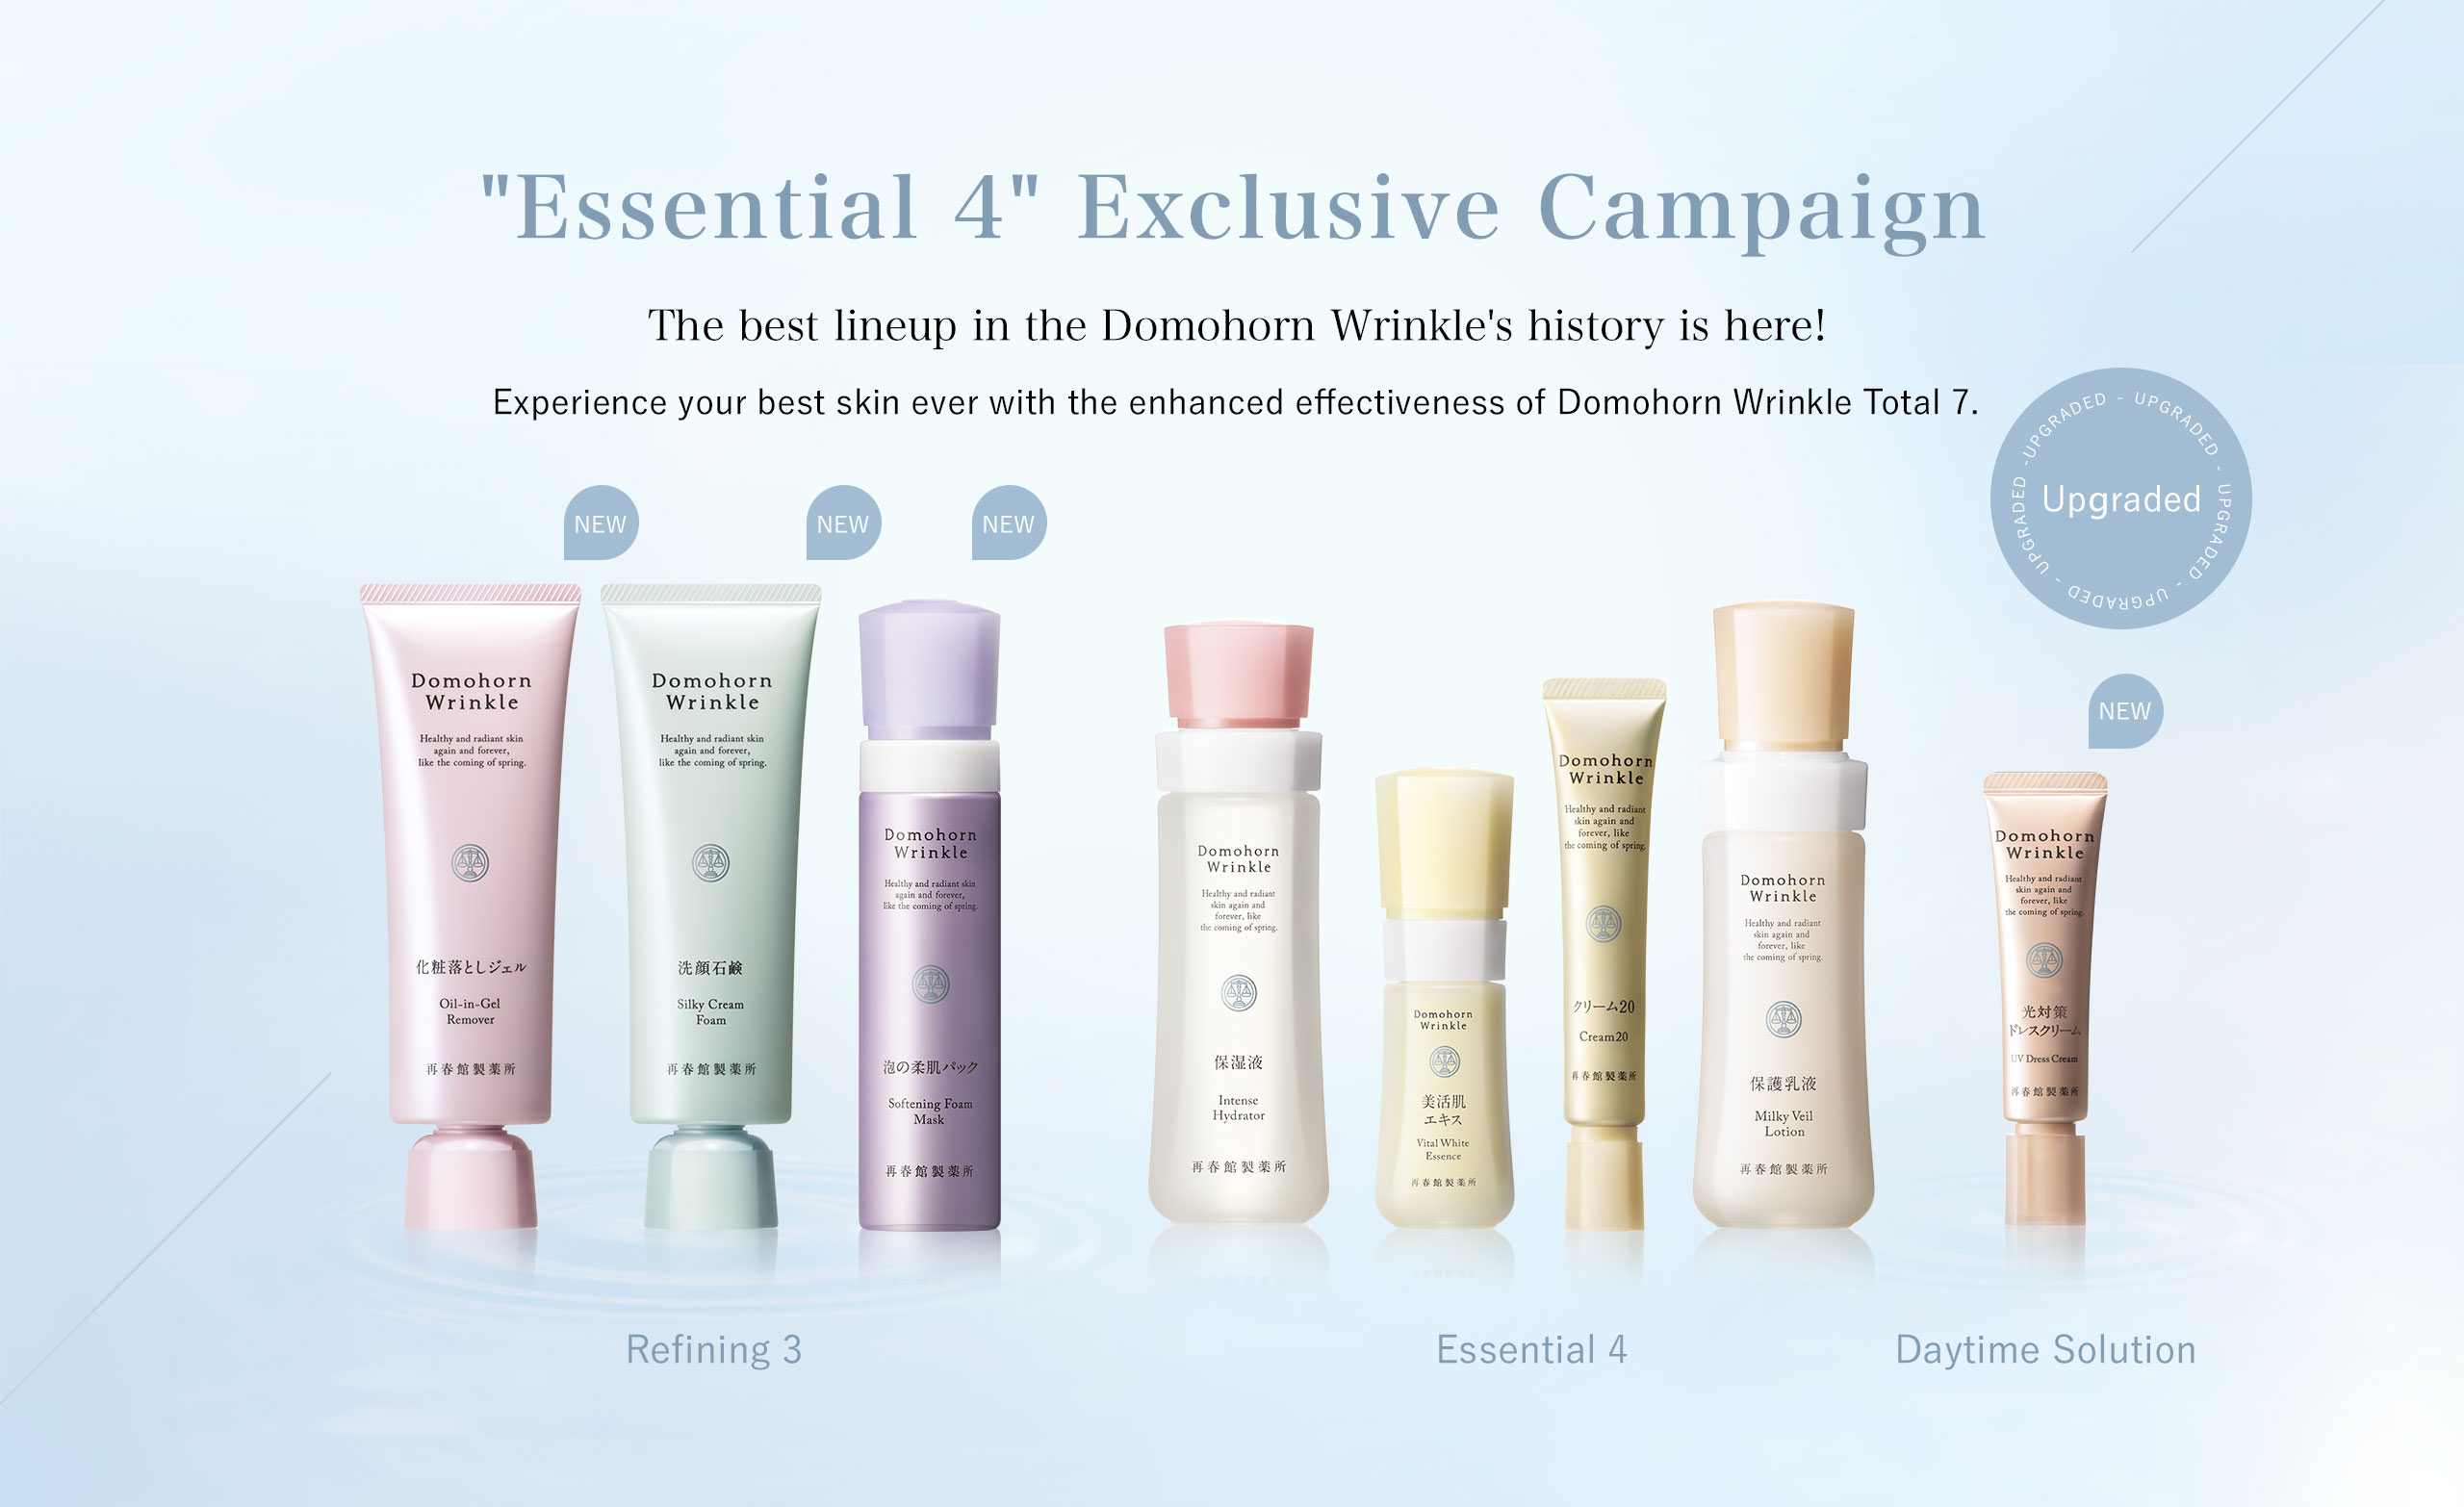 Essential 4 Exclusive Campaign The best lineup in the Domohorn Wrinkle's history is here! Experience your best skin ever with the enhanced effectiveness of Domohorn Wrinkle Total 7.